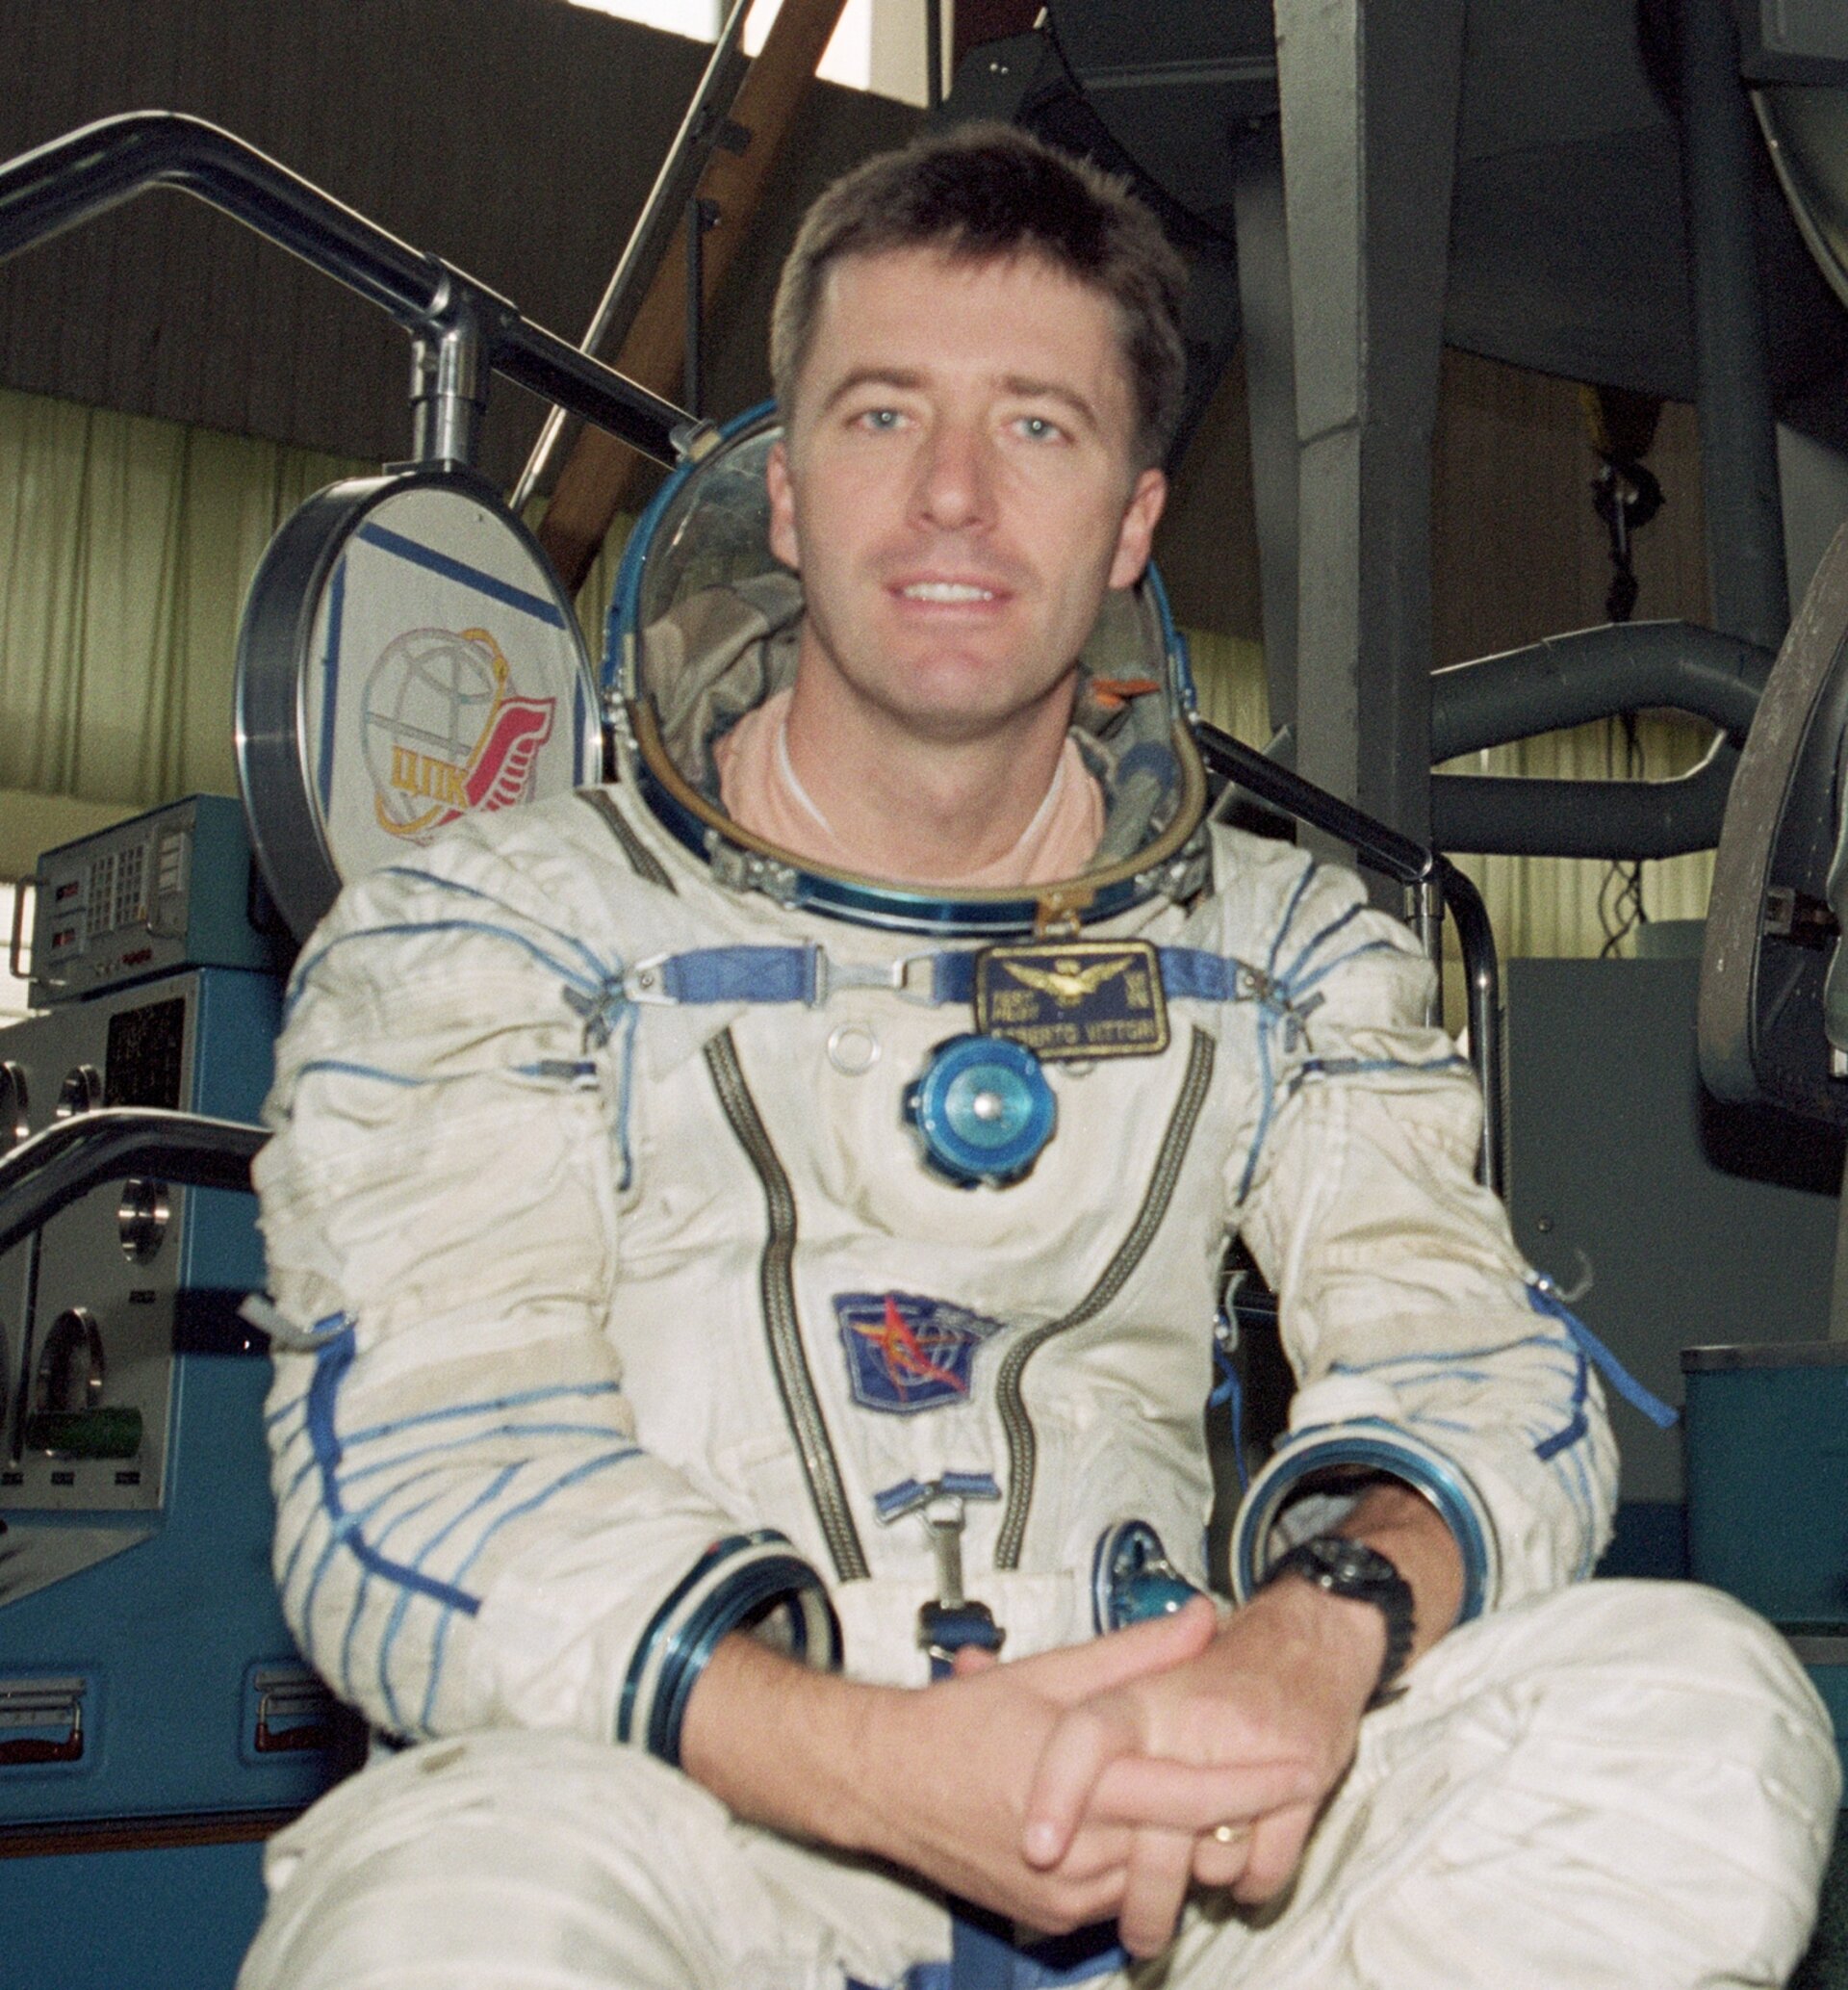 Vittori during astronaut training at Star City near Moscow